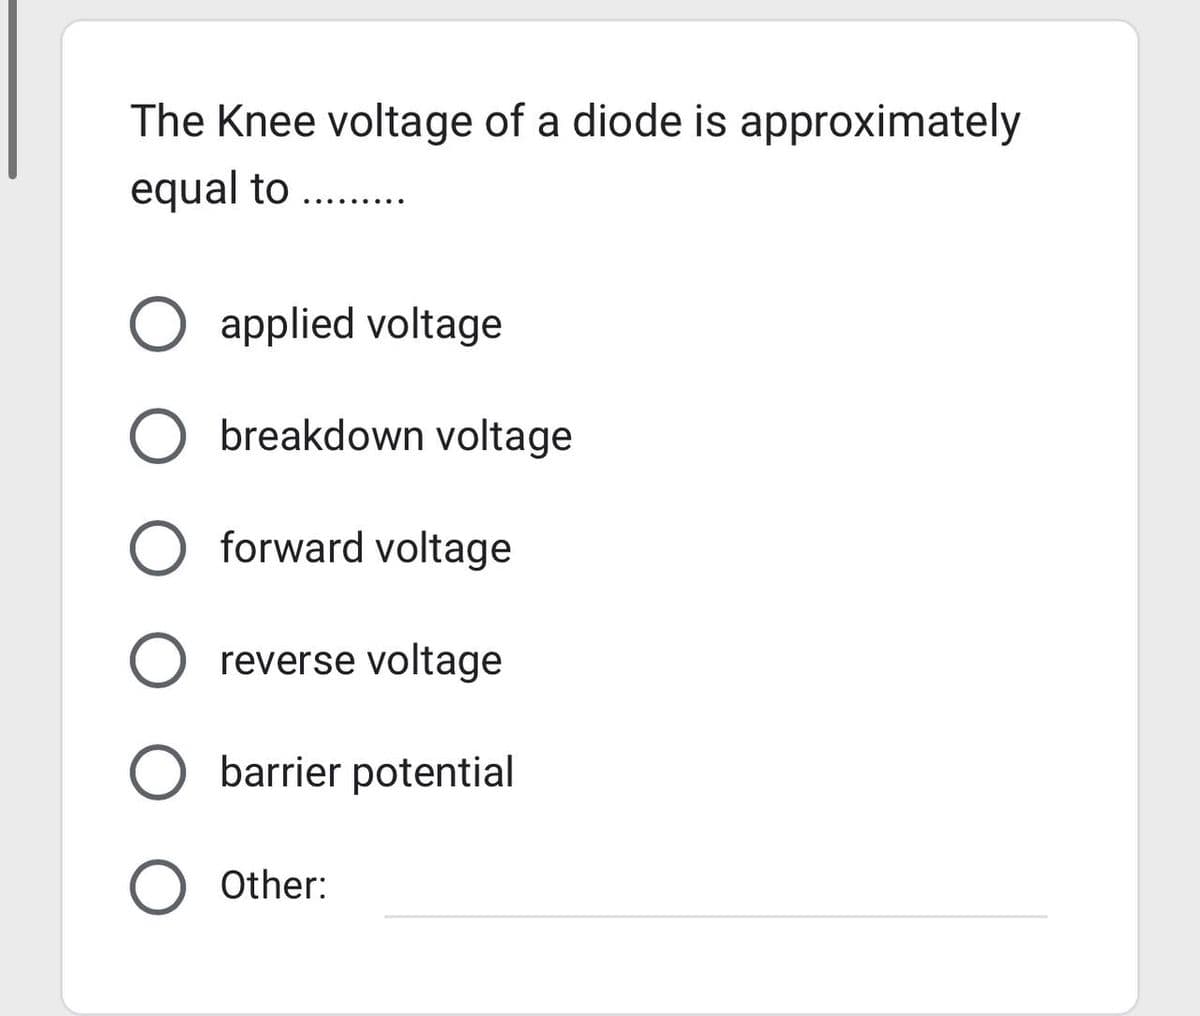 The Knee voltage of a diode is approximately
equal to
O applied voltage
O breakdown voltage
O forward voltage
O reverse voltage
O barrier potential
O Other: